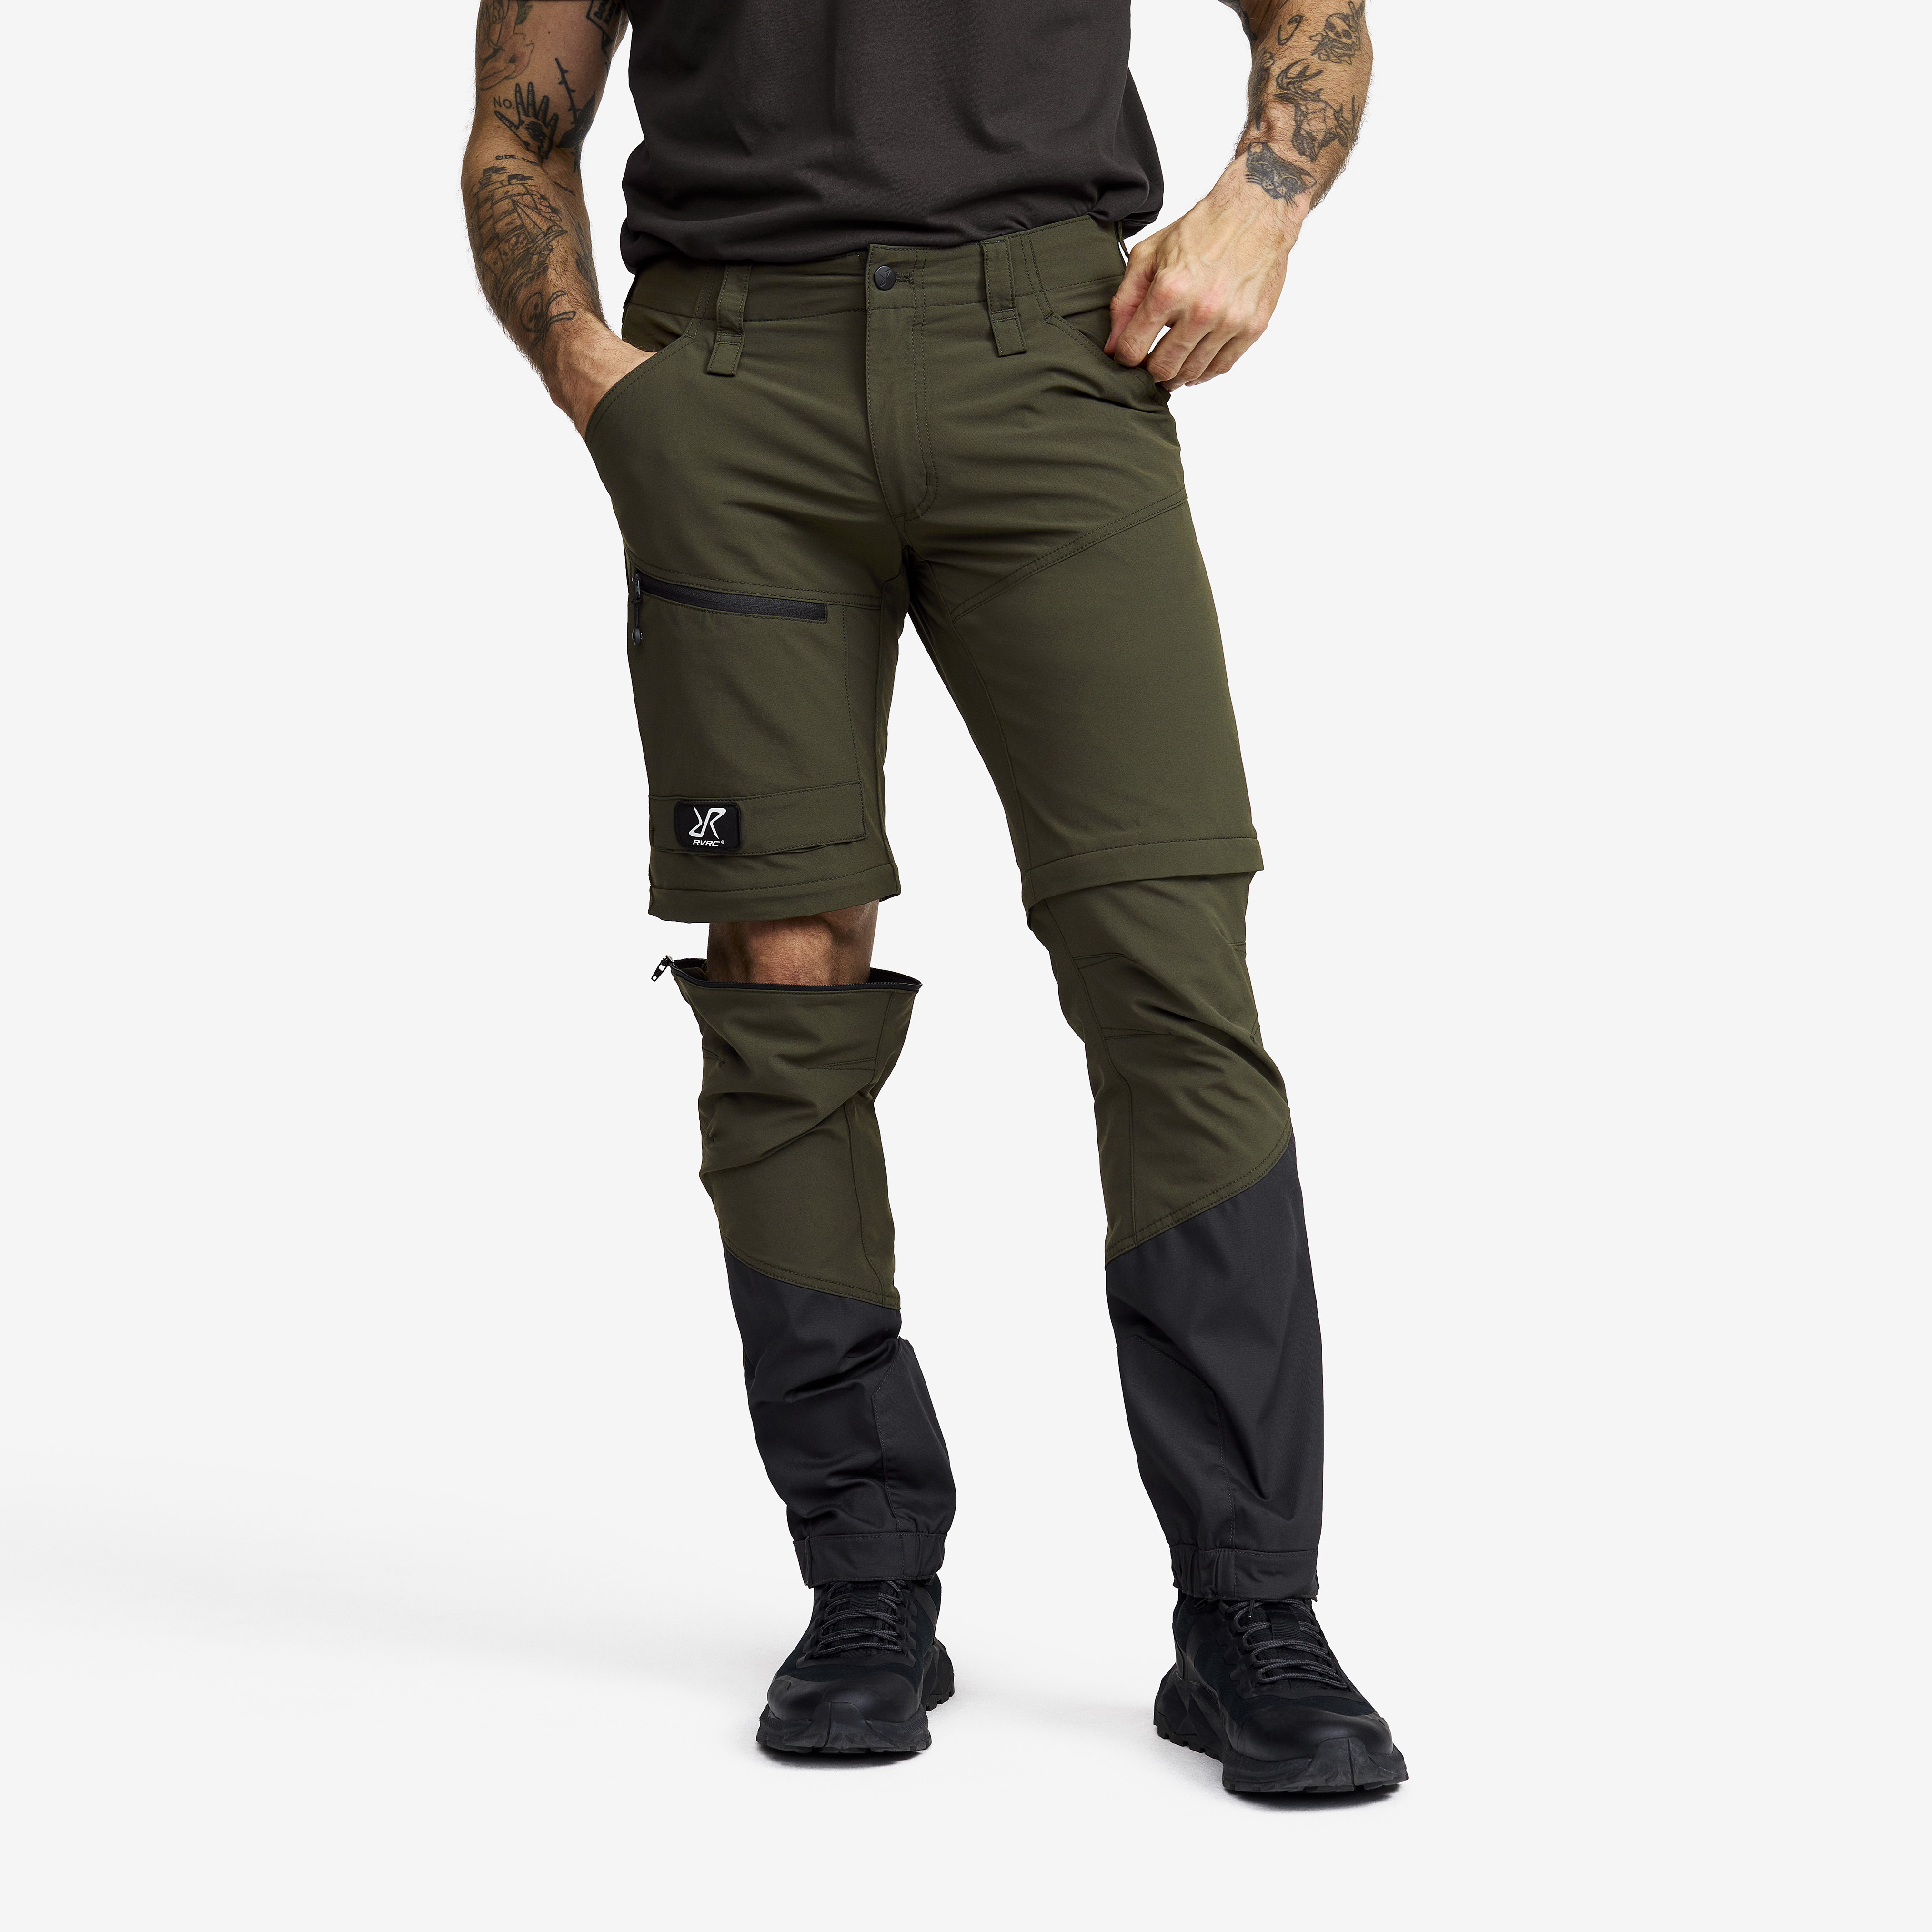 Range Pro Zip-off Pants Forest Night/Anthracite Homme